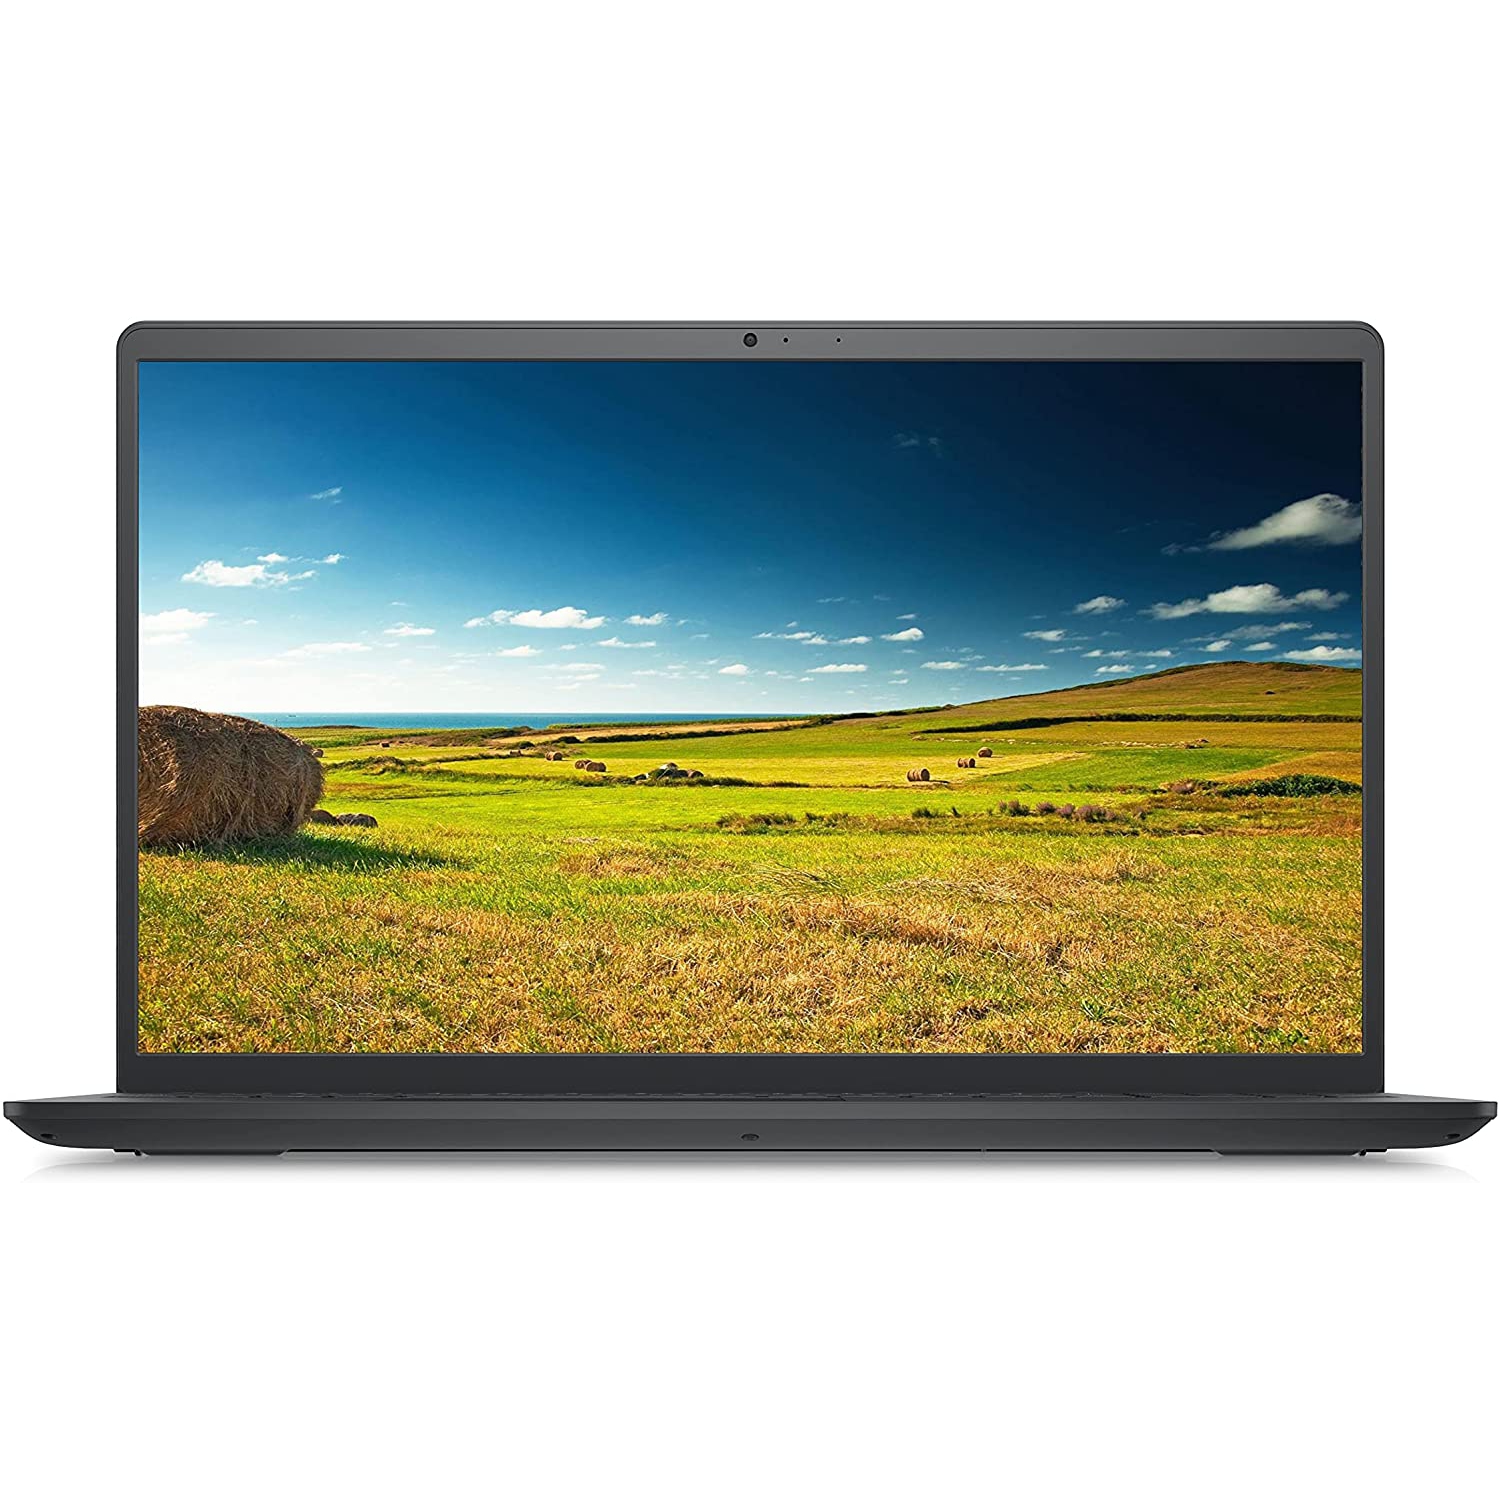 Refurbished (Excellent) - DELL INSPIRON 3511 LAPTOP 15.6 FHD TOUCH I5-1135G7 8GB 256GB I3511-5101BLK-PUS Certified Refurbished